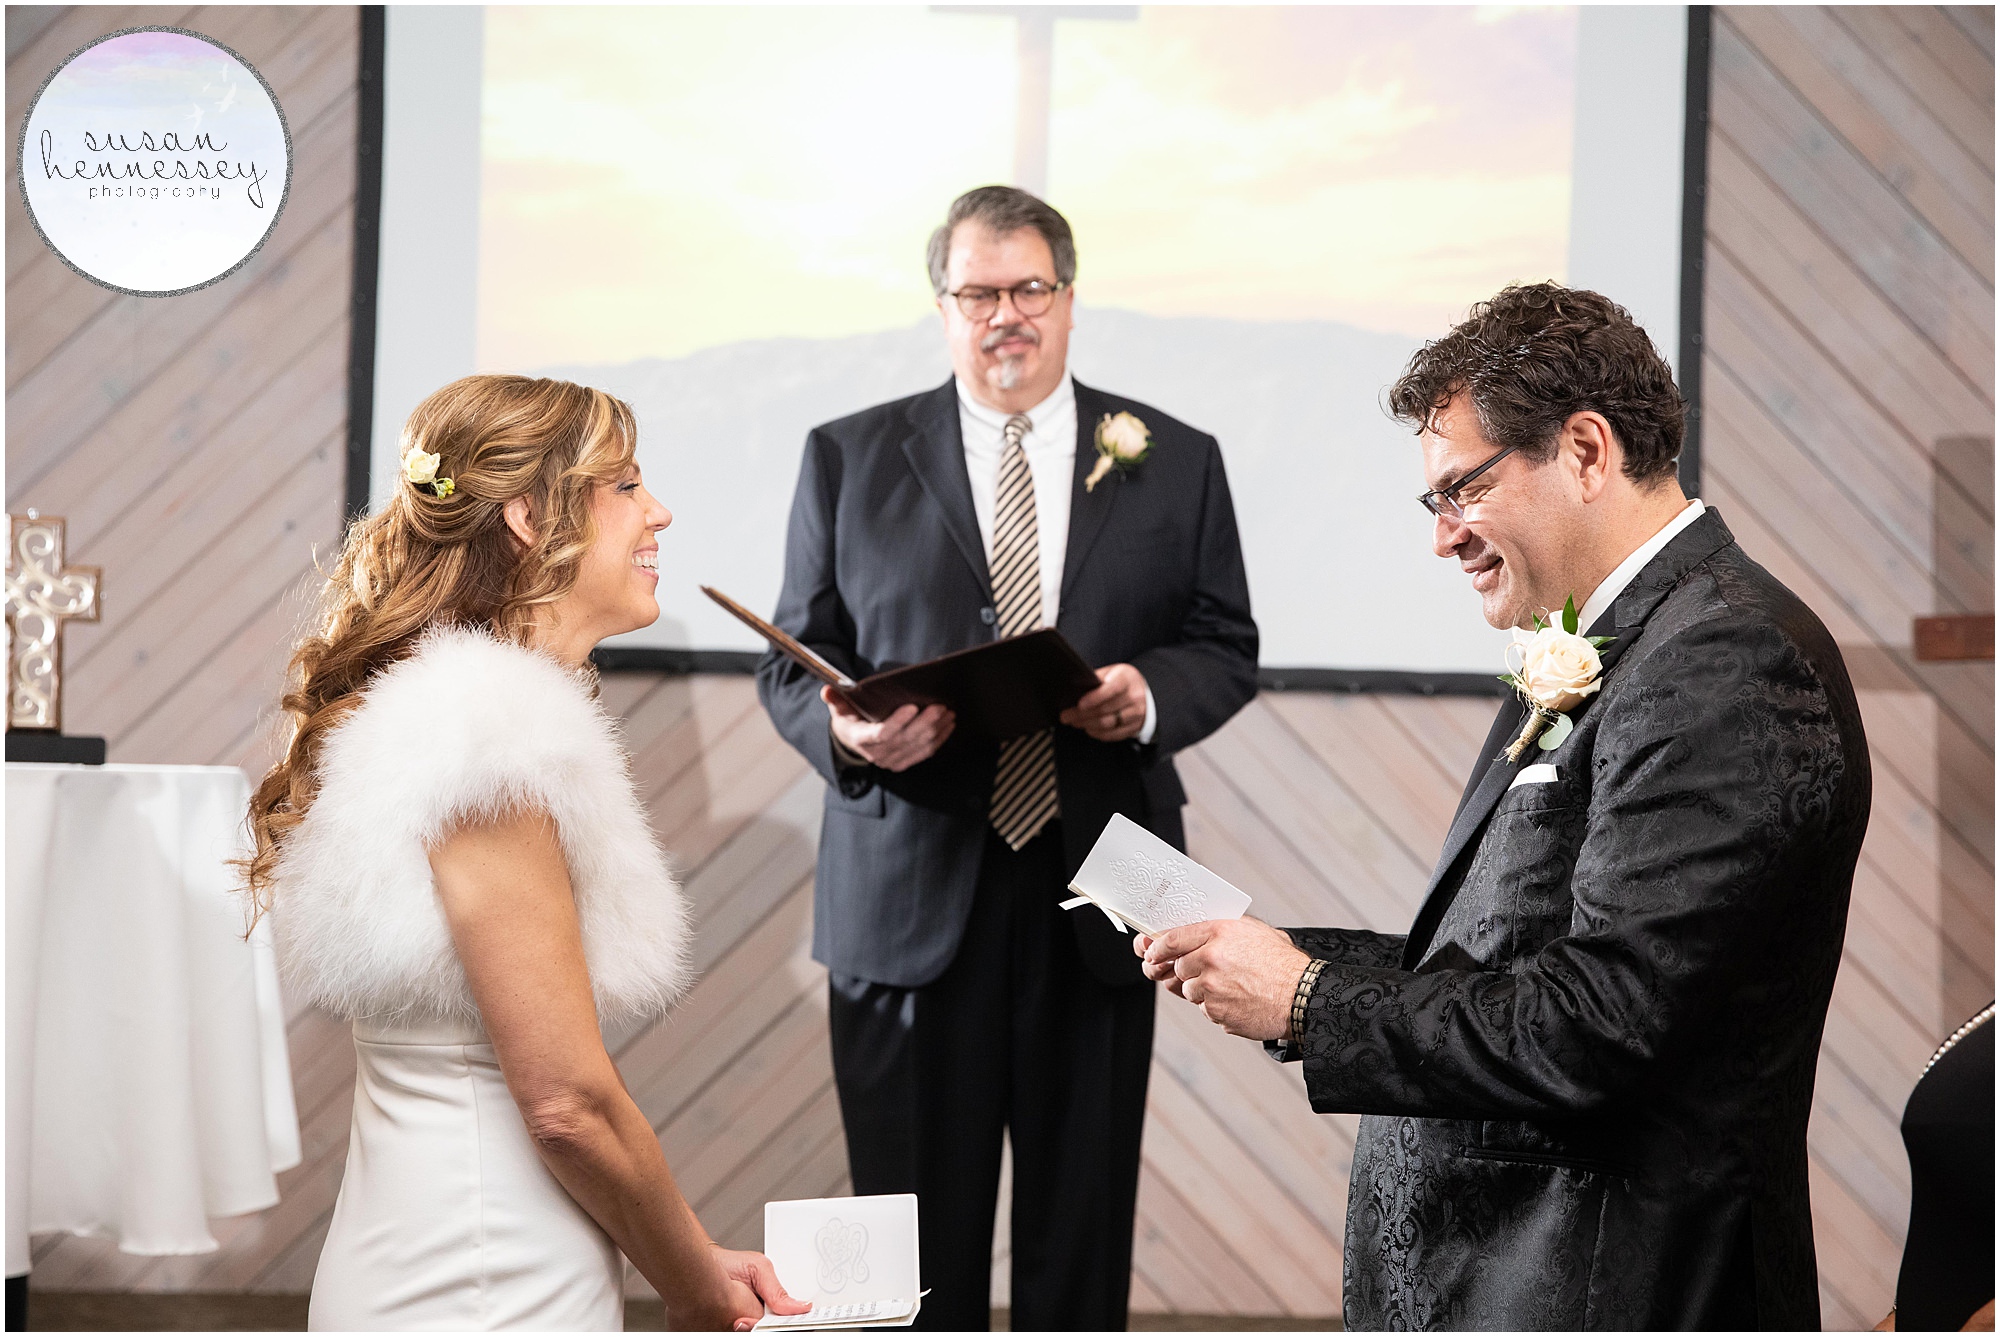 A winter microwedding at the Fellowship Alliance Chapel in Medford, NJ